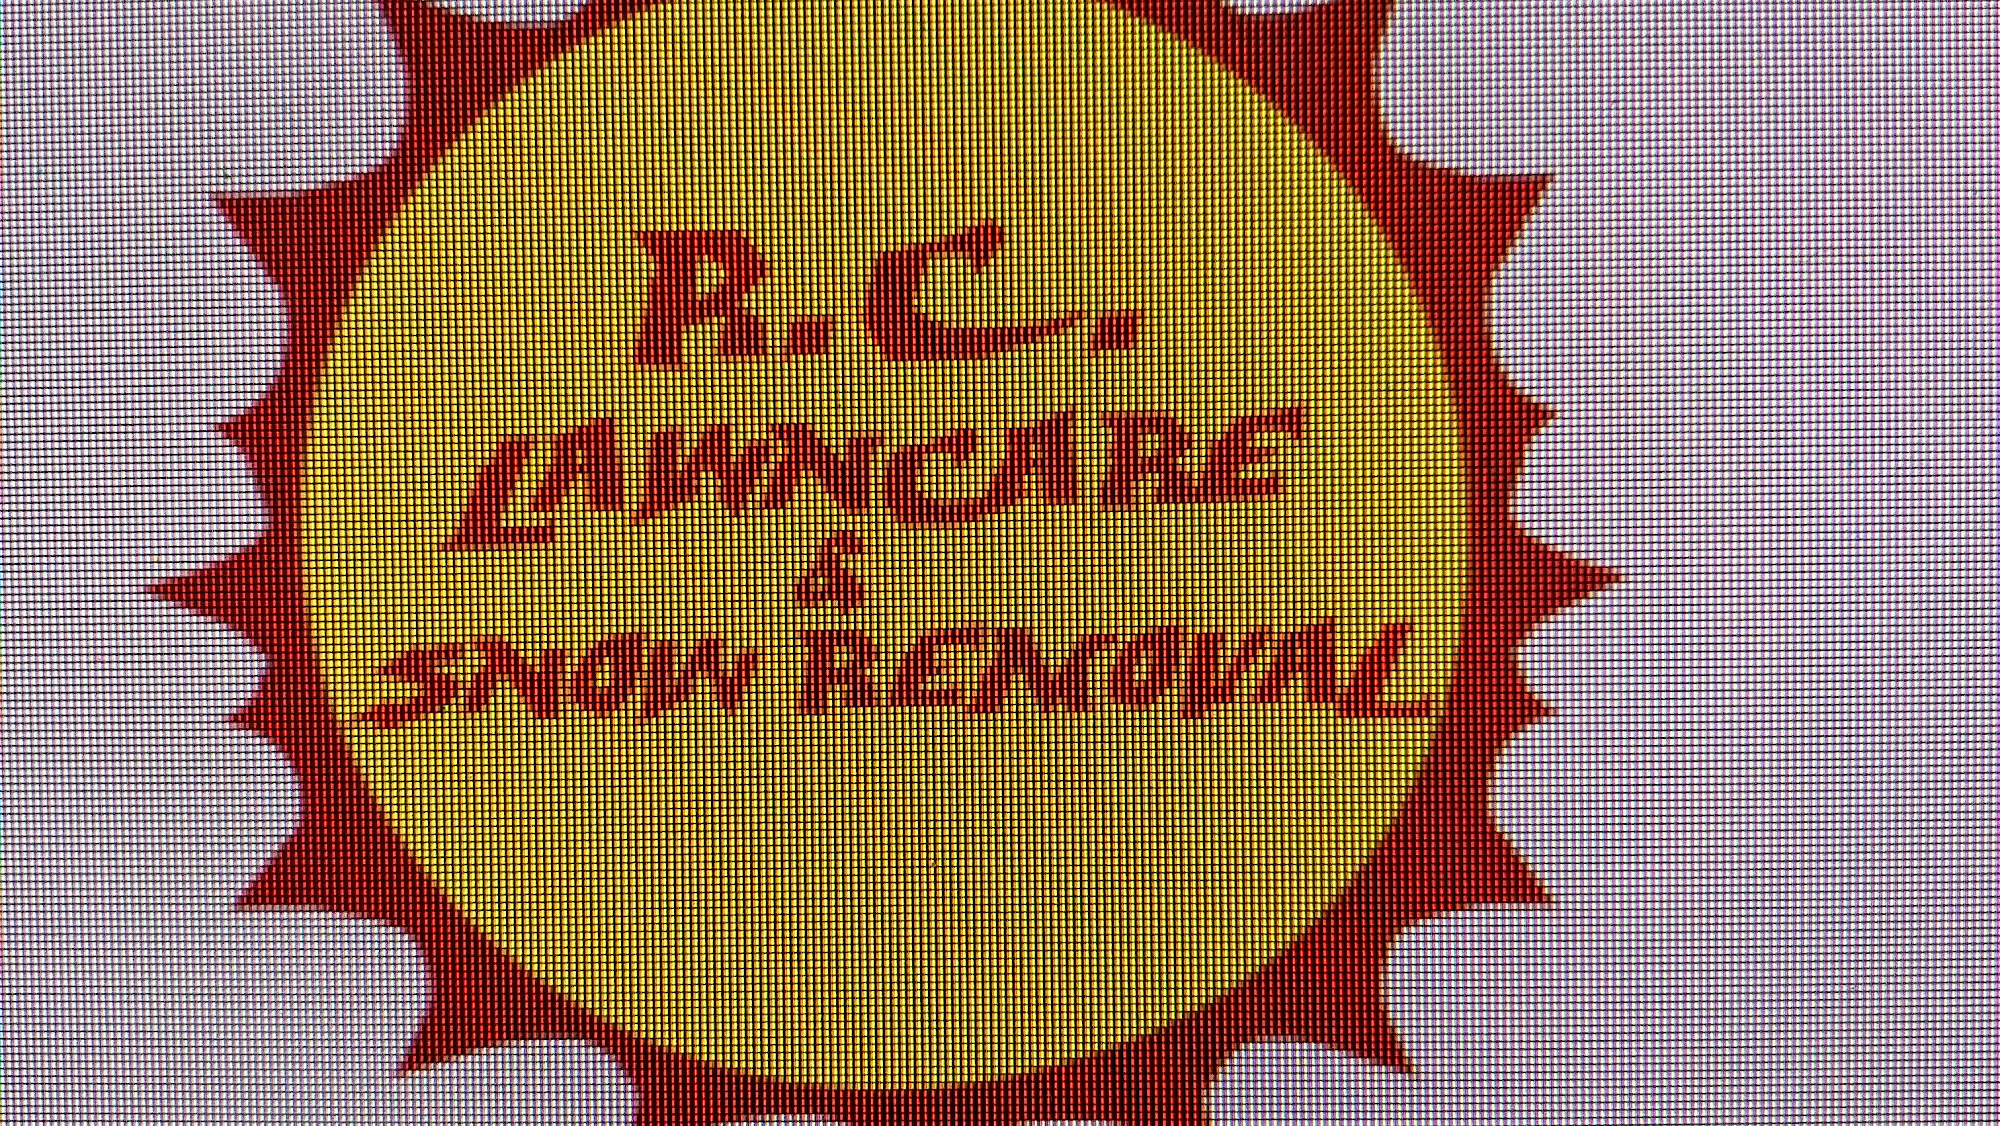 R.C. Lawn Care & Snow Removal Inc Our Quality Is A Reflection Of You!